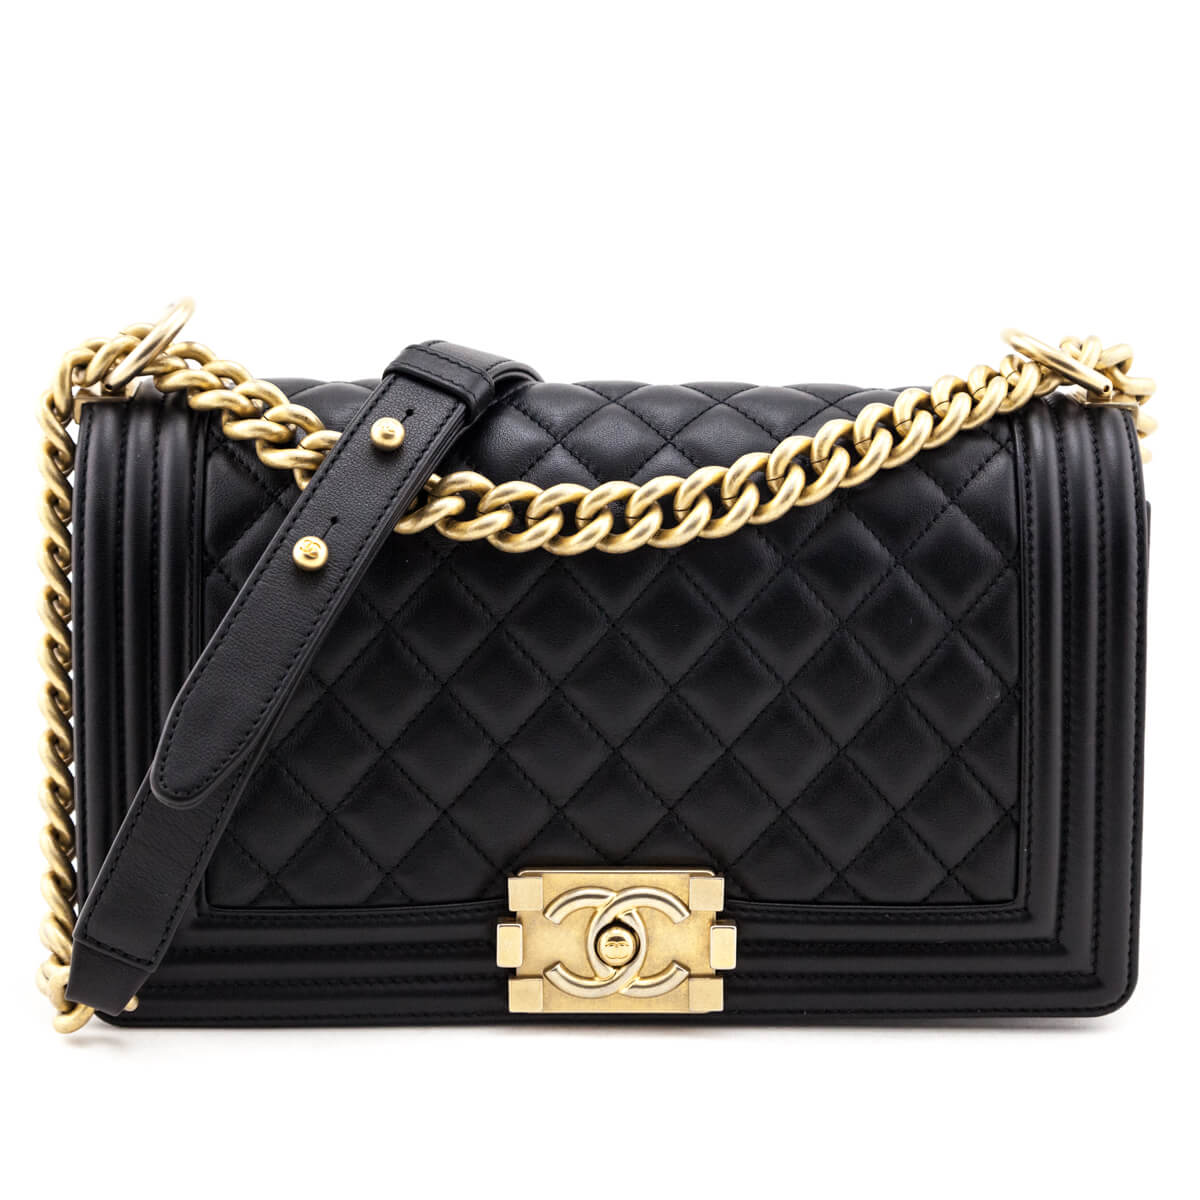 Chanel Black Quilted Lambskin Medium Boy Flap Bag - Love that Bag etc - Preowned Authentic Designer Handbags & Preloved Fashions